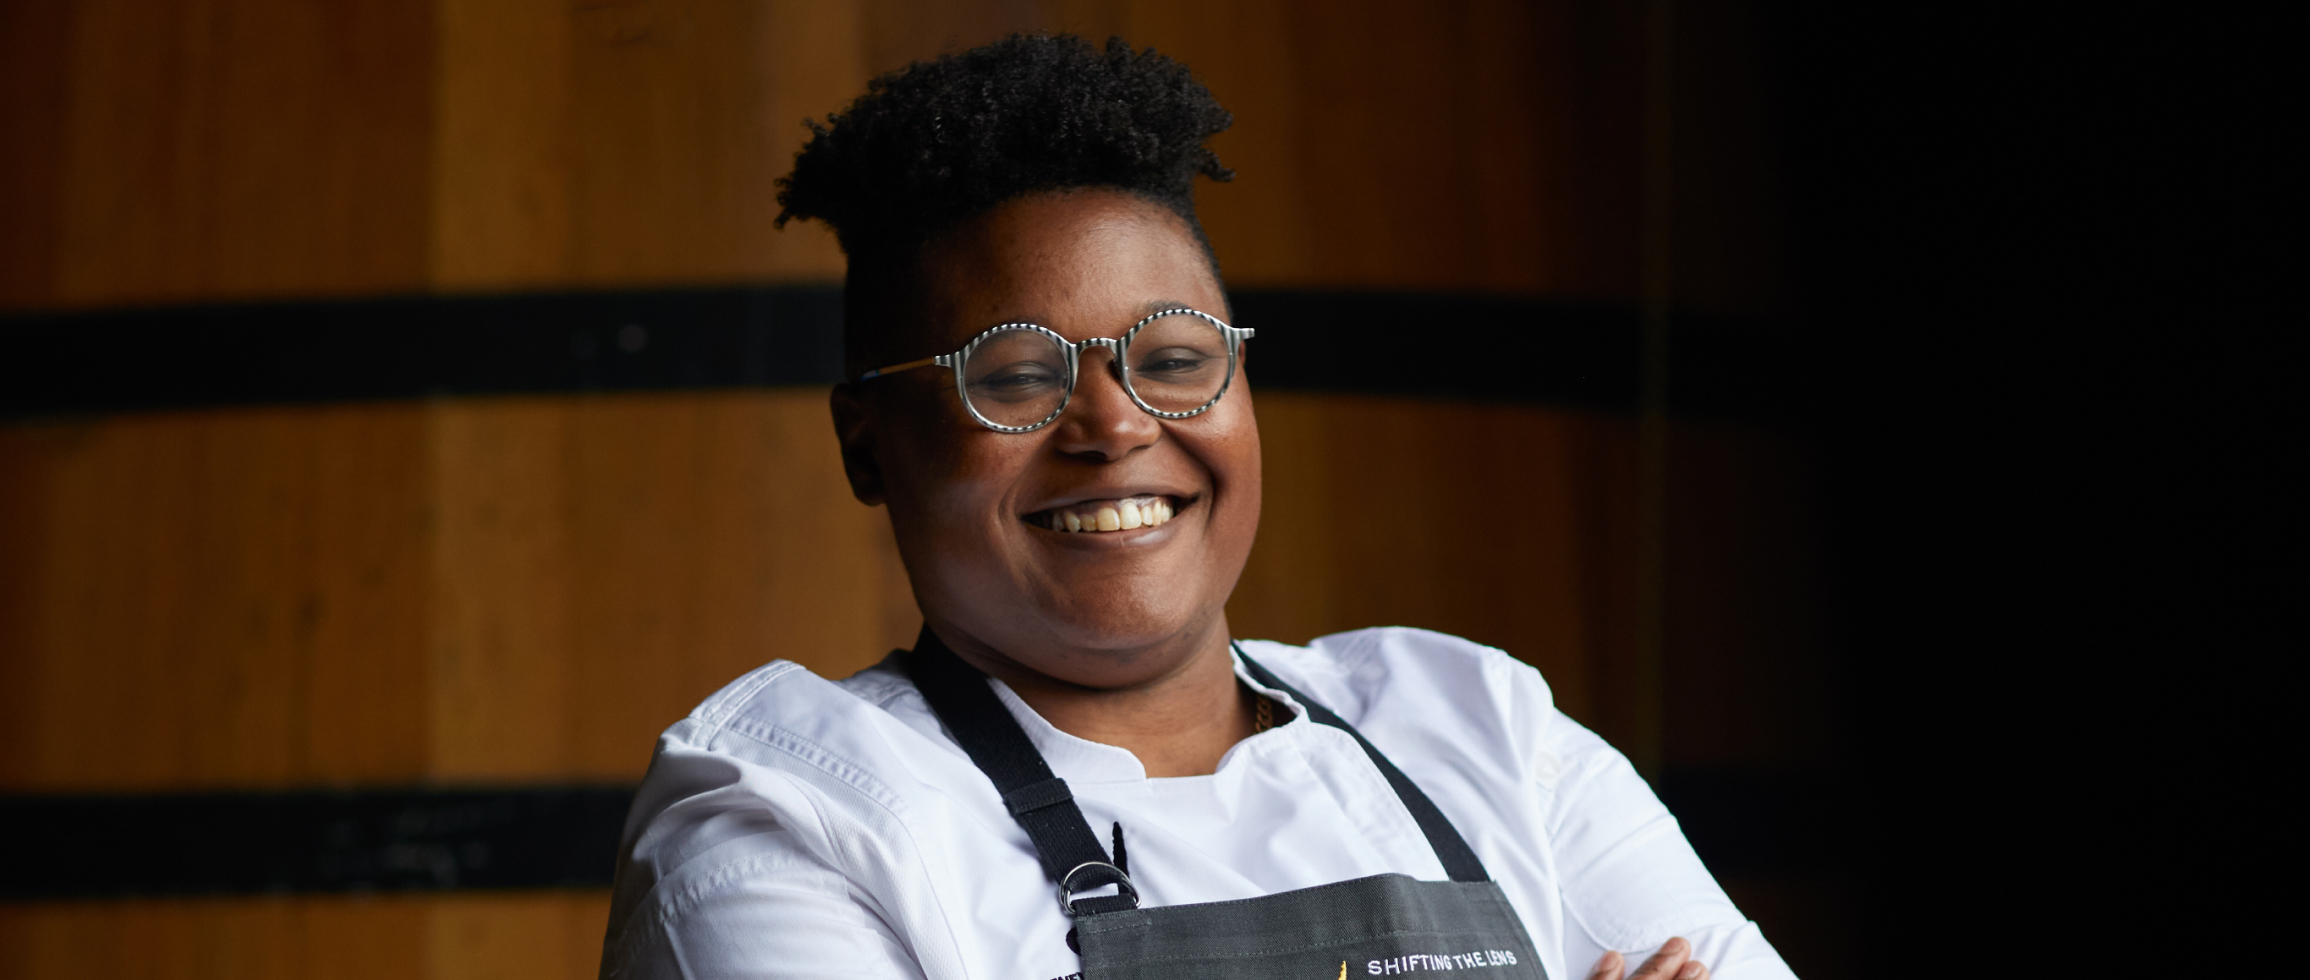 Chef Rashida is a featured chef in the Shifting the Lens culinary program at J Vineyards and Winery